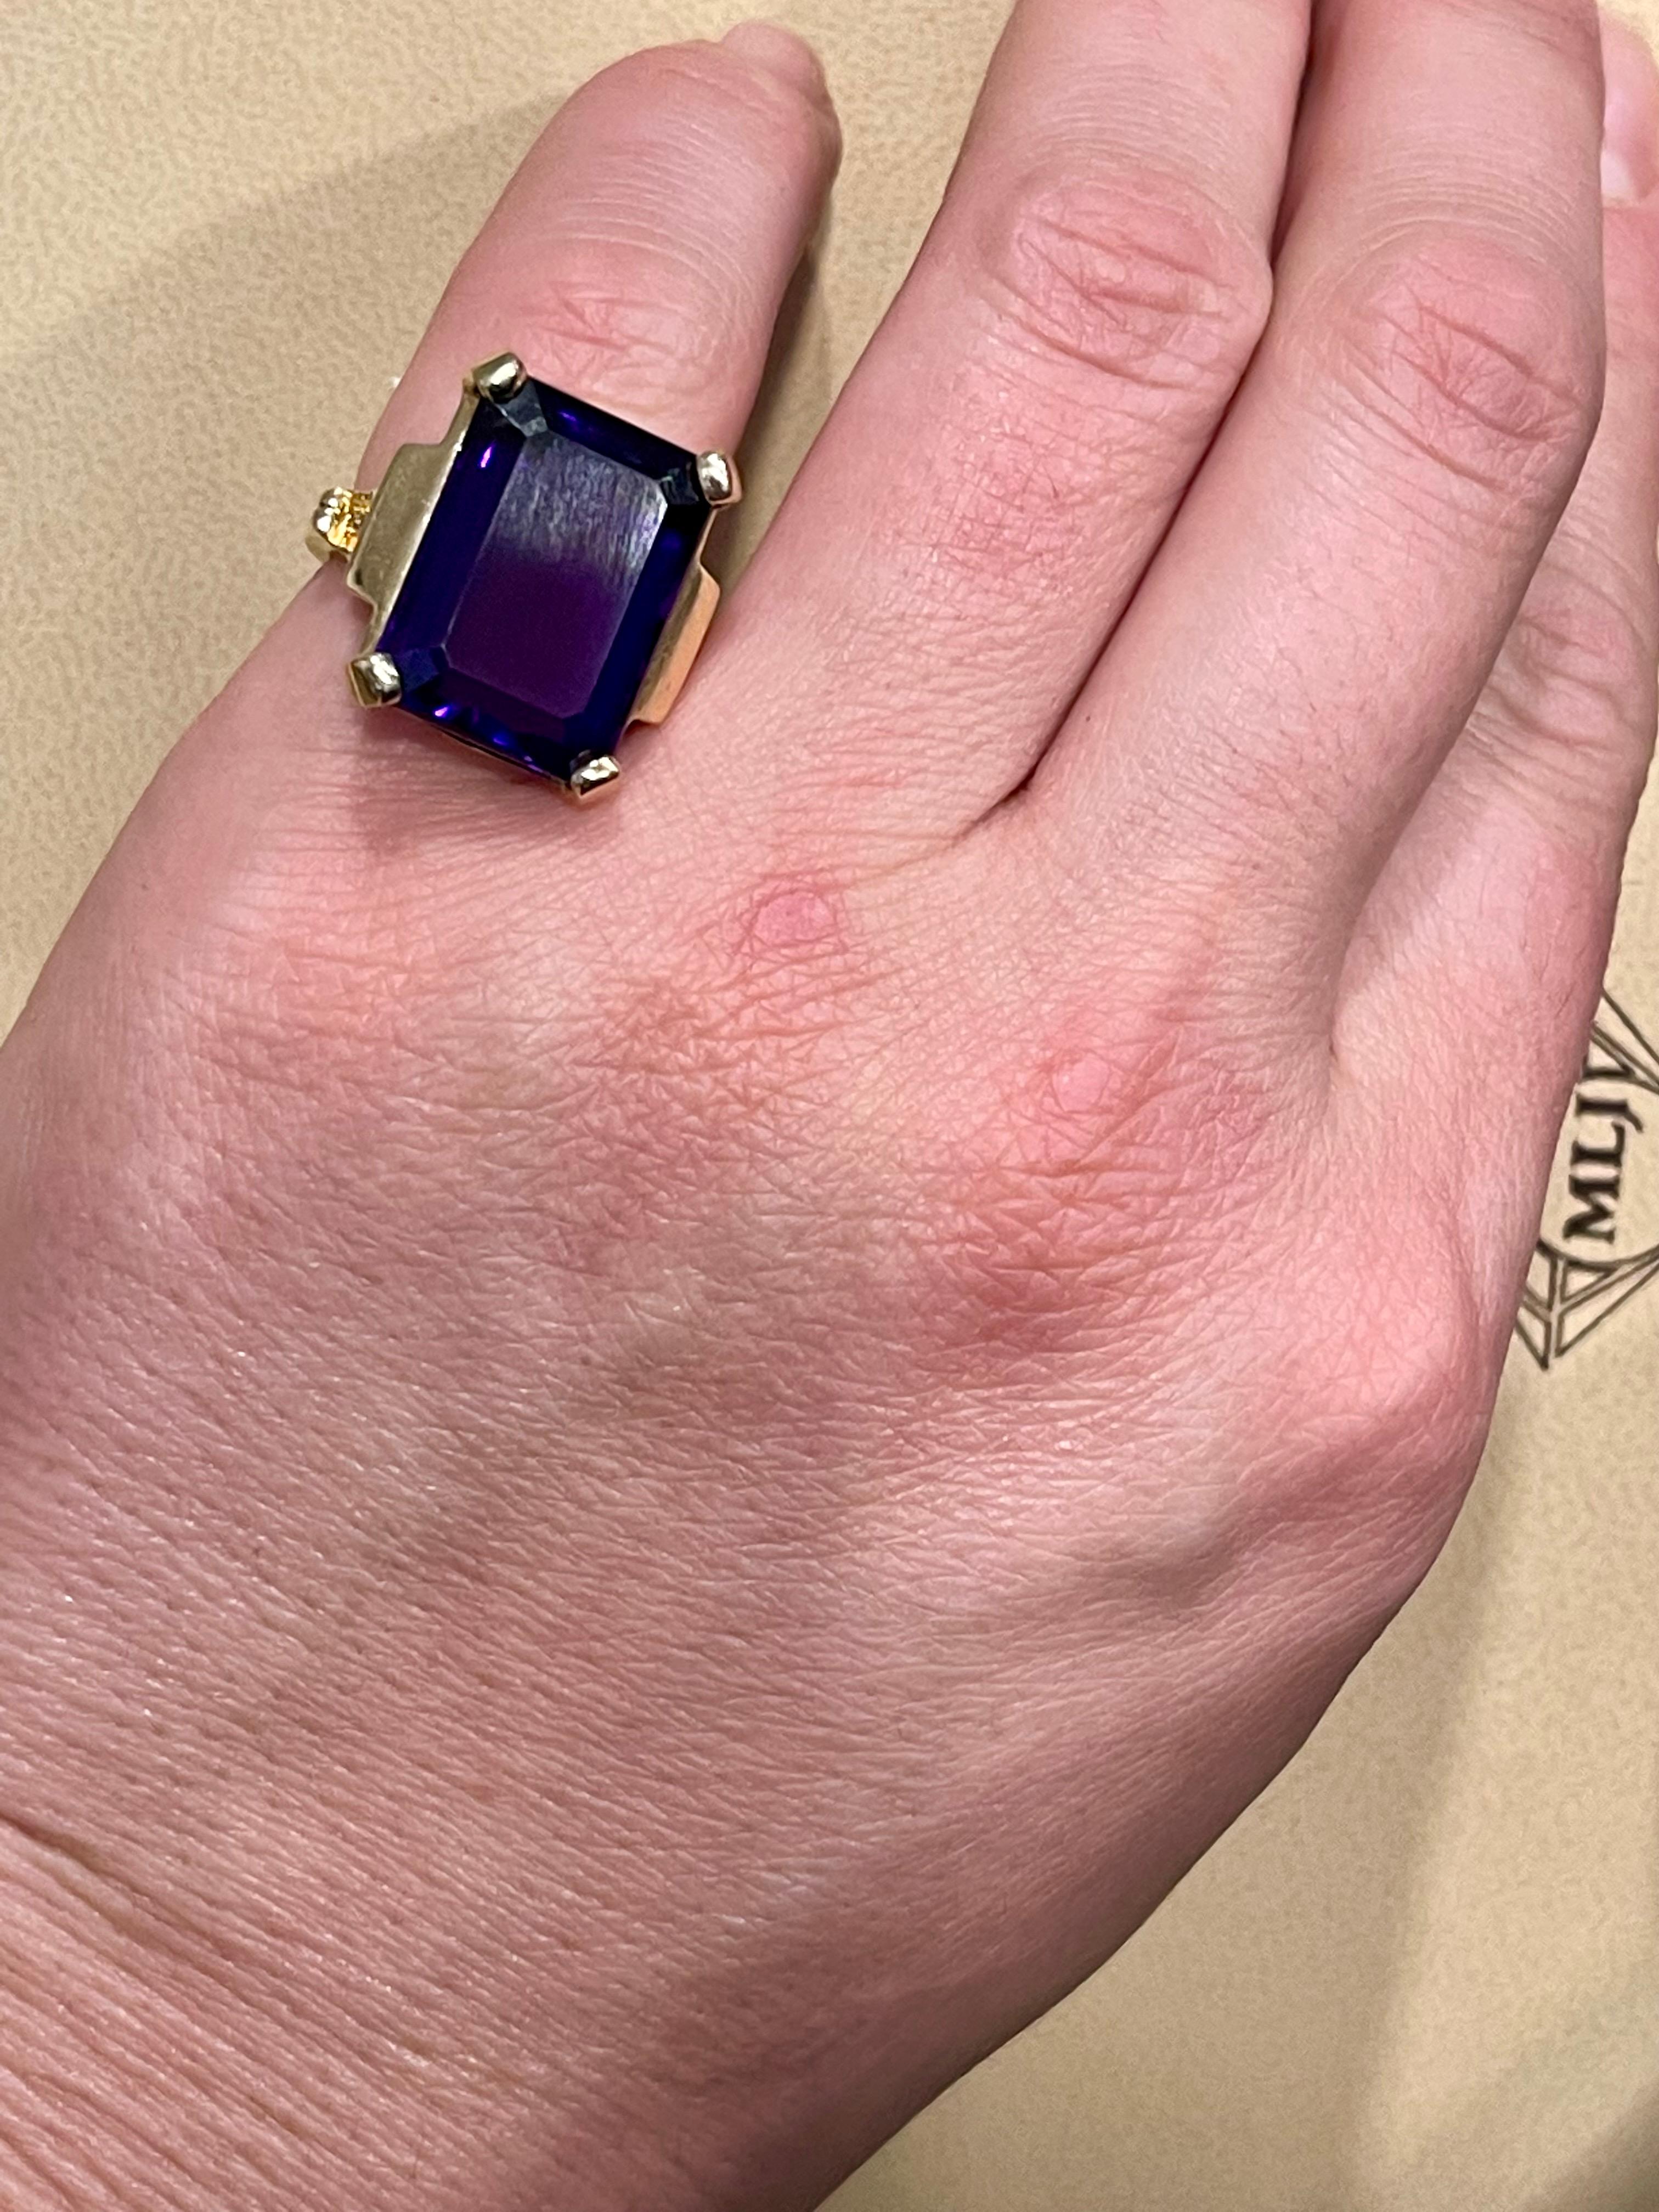 15 Carat Emerald Cut Amethyst Cocktail Ring in 14 Karat Yellow Gold For Sale 8